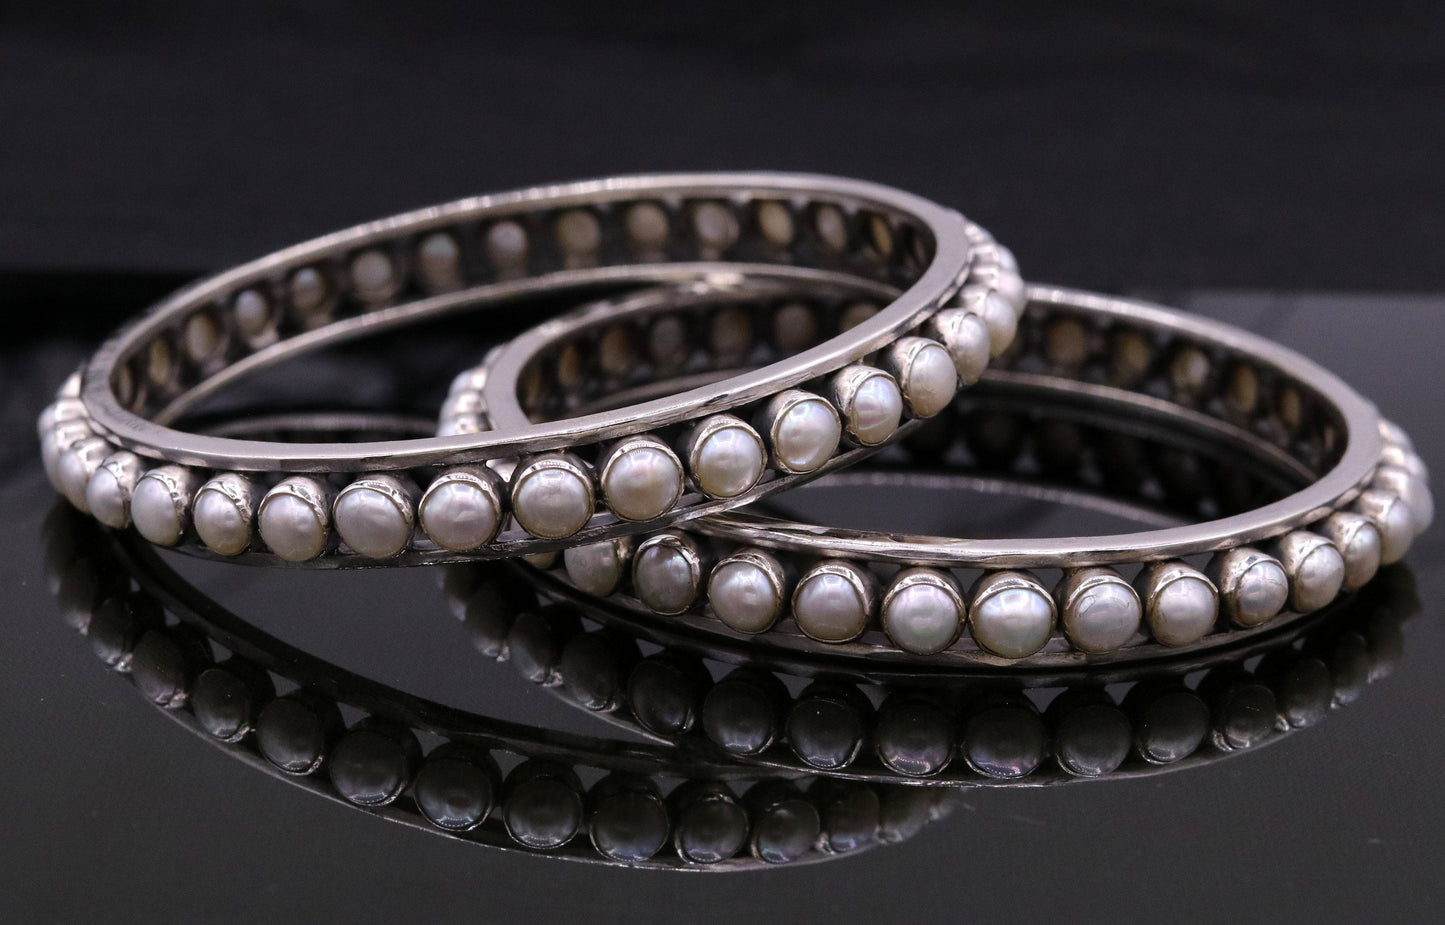 925 sterling silver gorgeous pearl bangle bracelet, fabulous oxidized customized bridal made gifting single bangle jewelry from india ba53 - TRIBAL ORNAMENTS